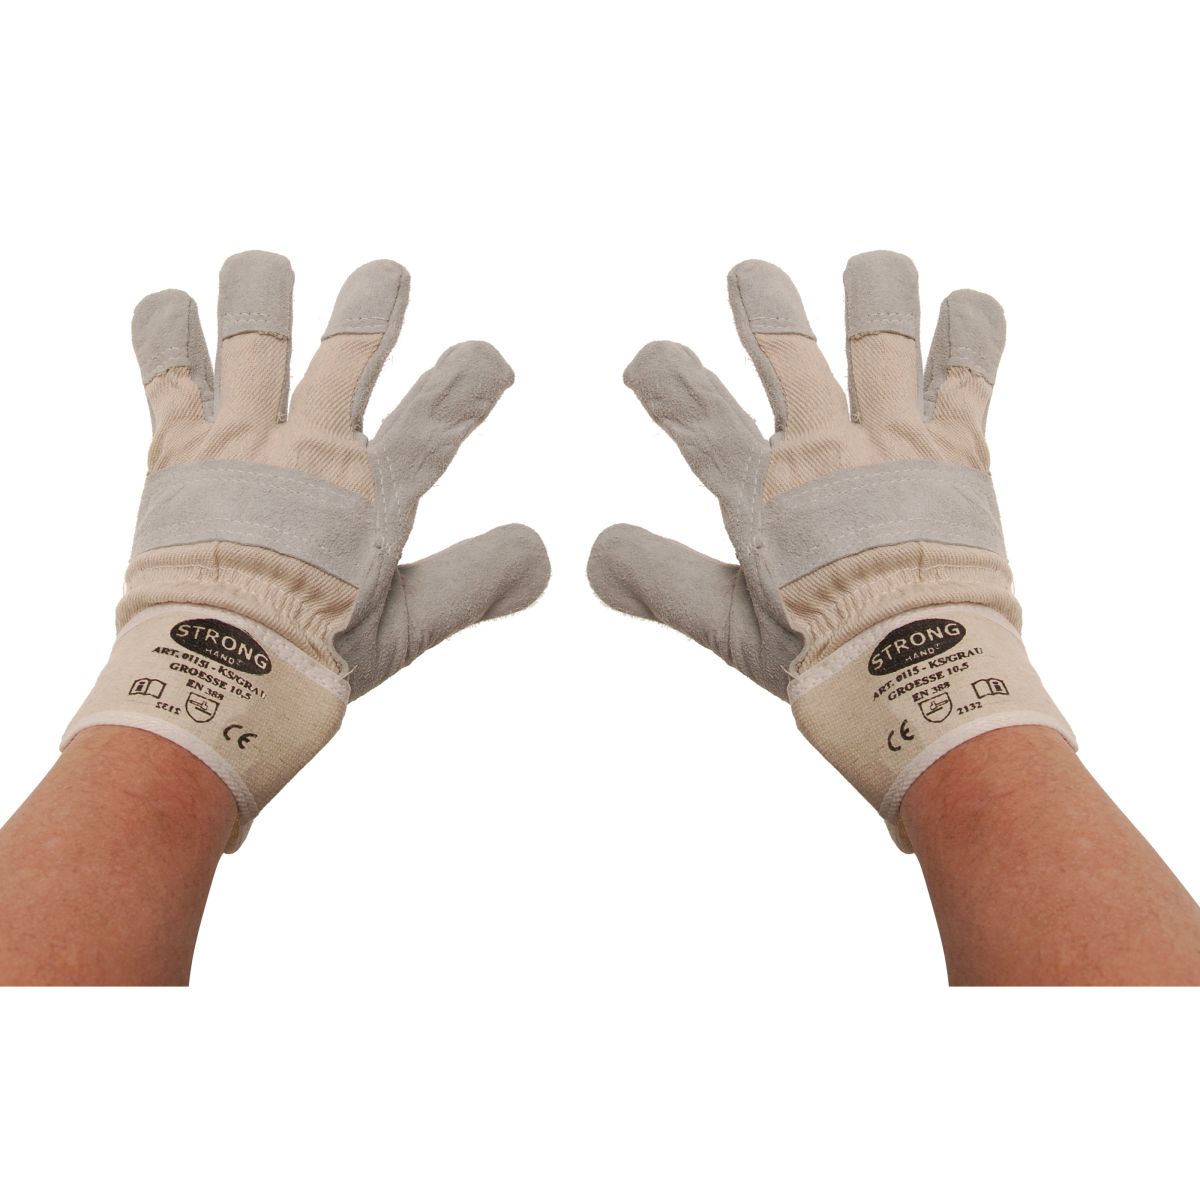 Work Gloves | Leather, lined | Size 10.5